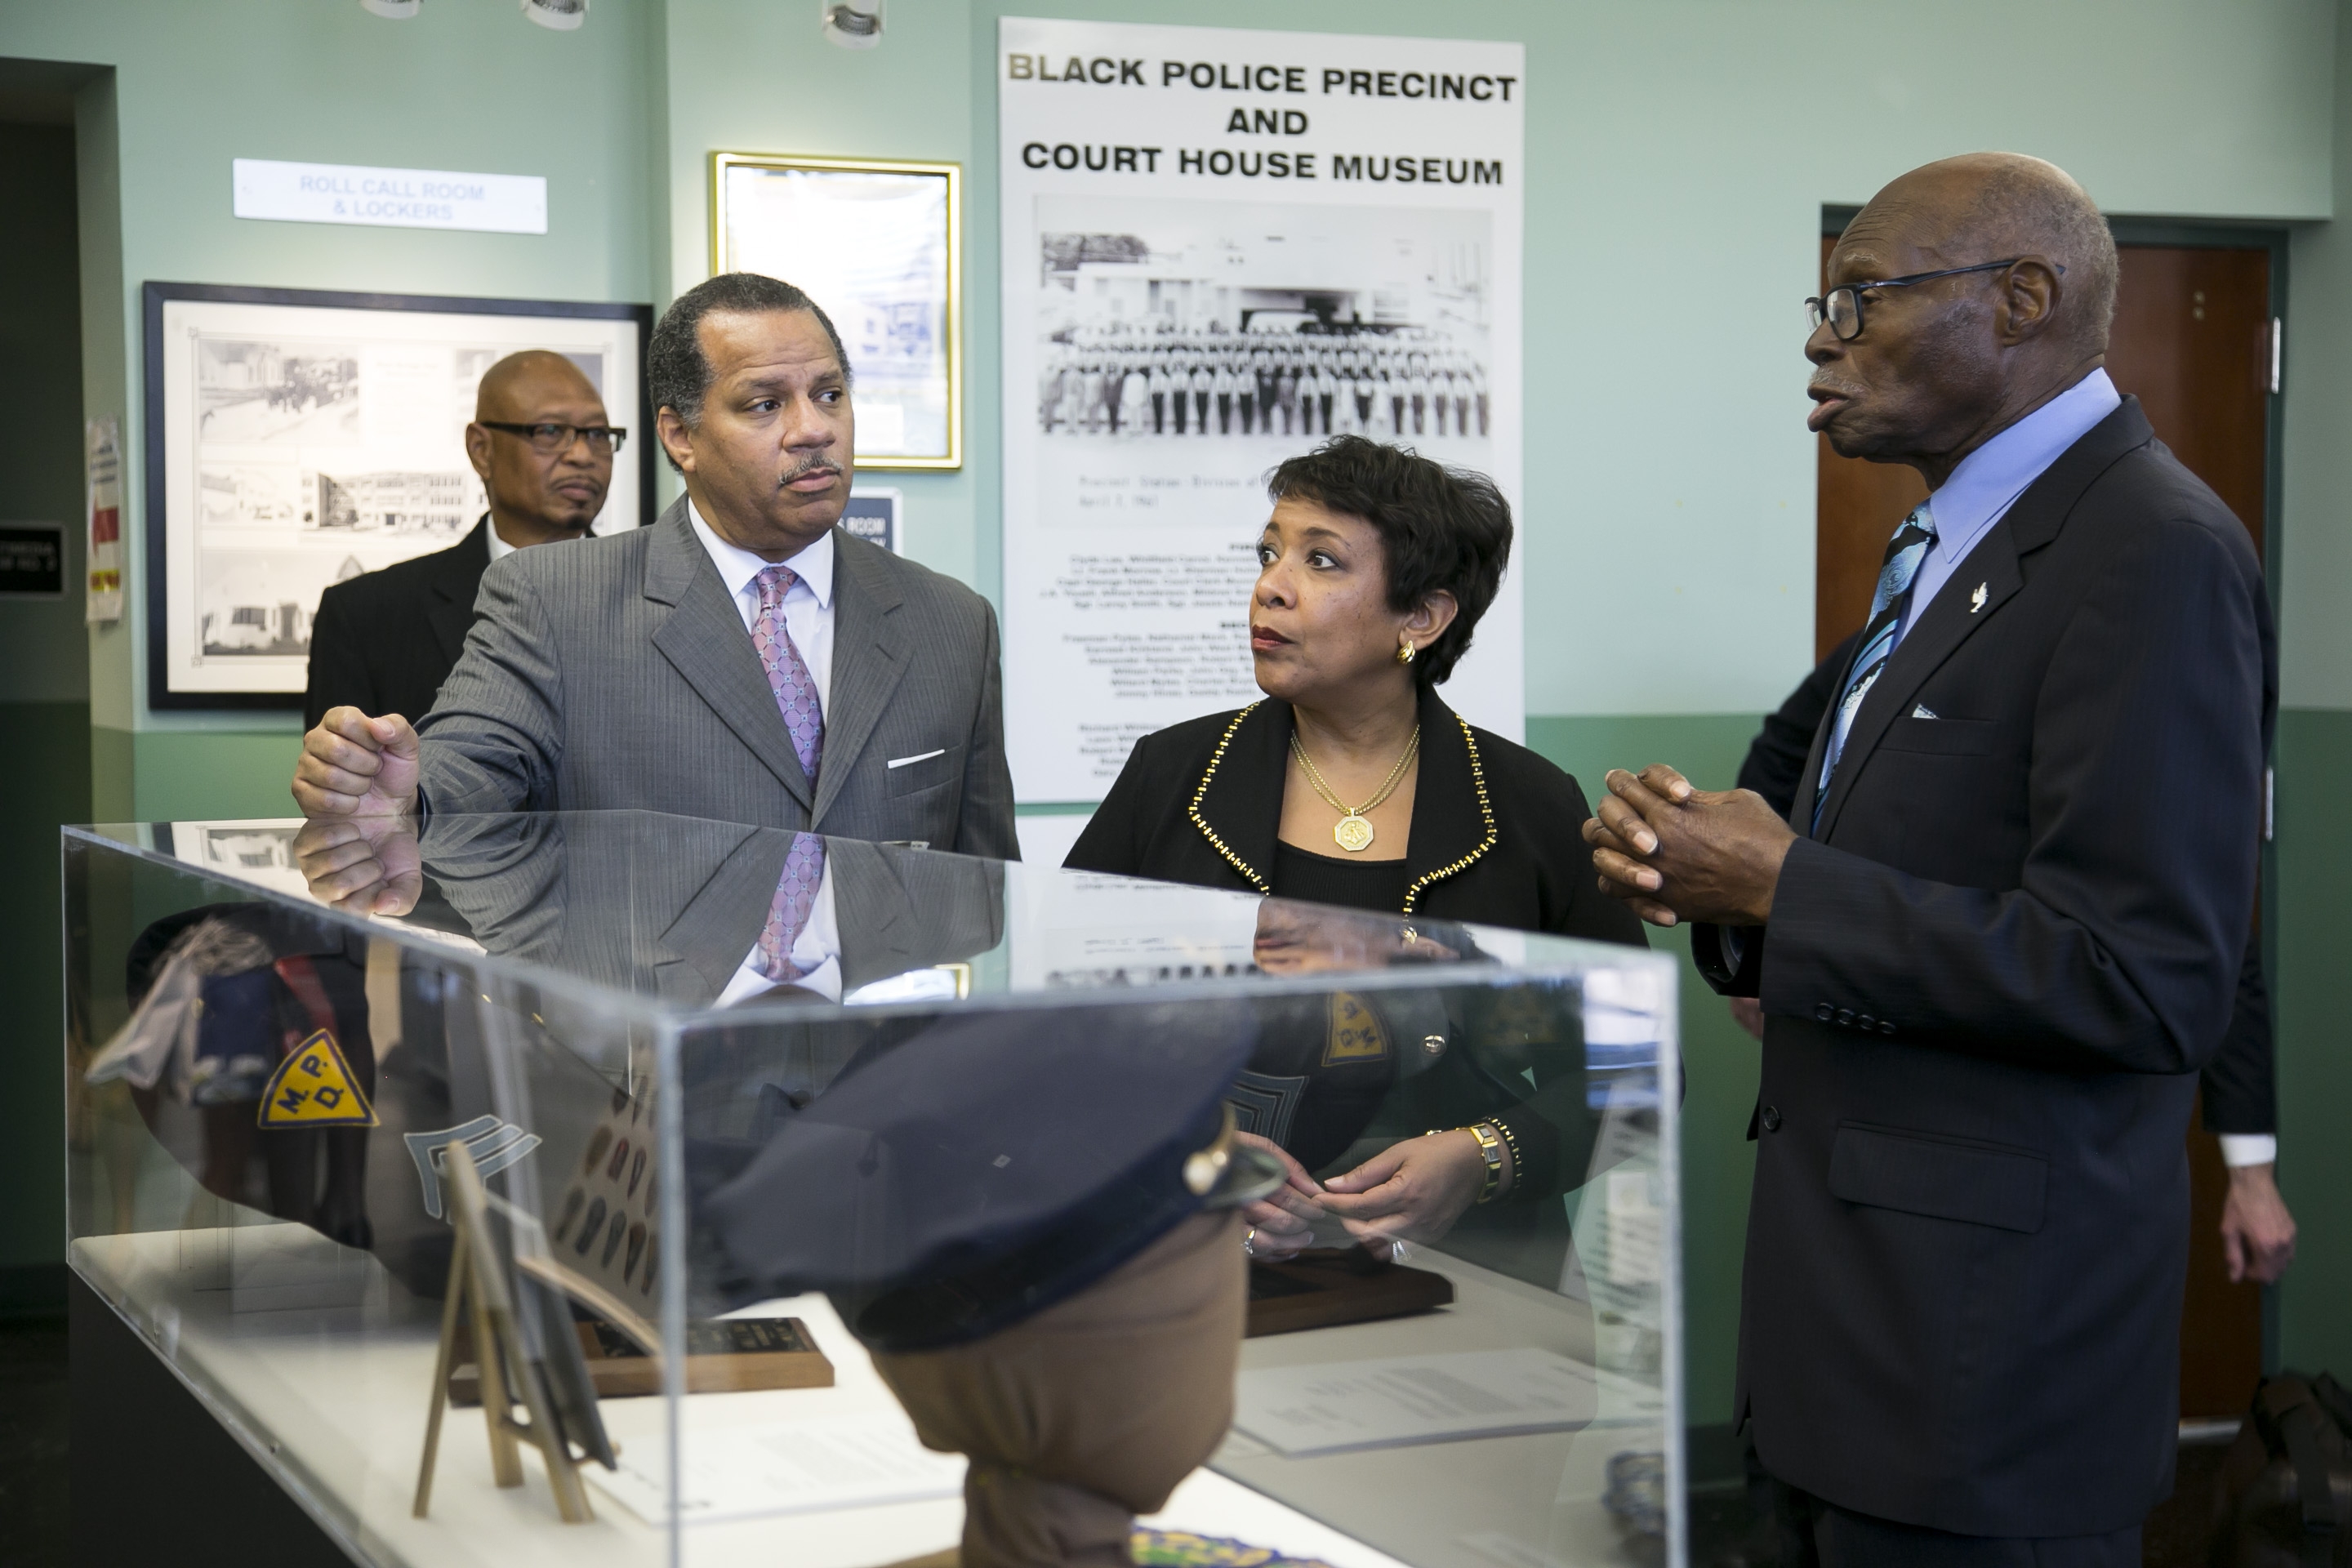 Attorney General Lynch toured the Black Police Precinct & Courthouse Museum with one of Miami’s first black police officers,